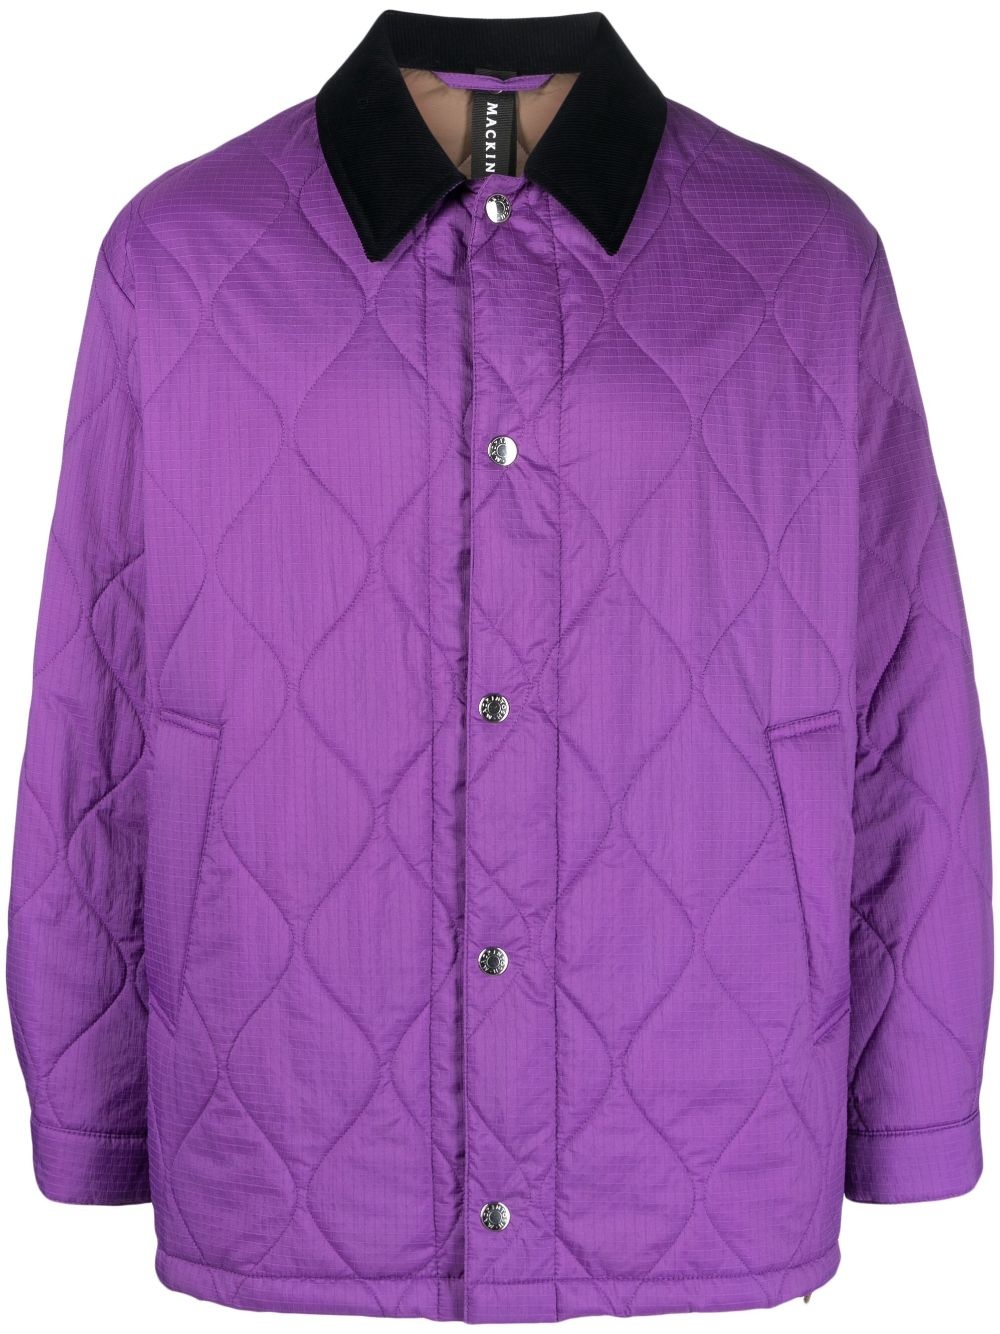 Teeming quilted coach jacket - 1